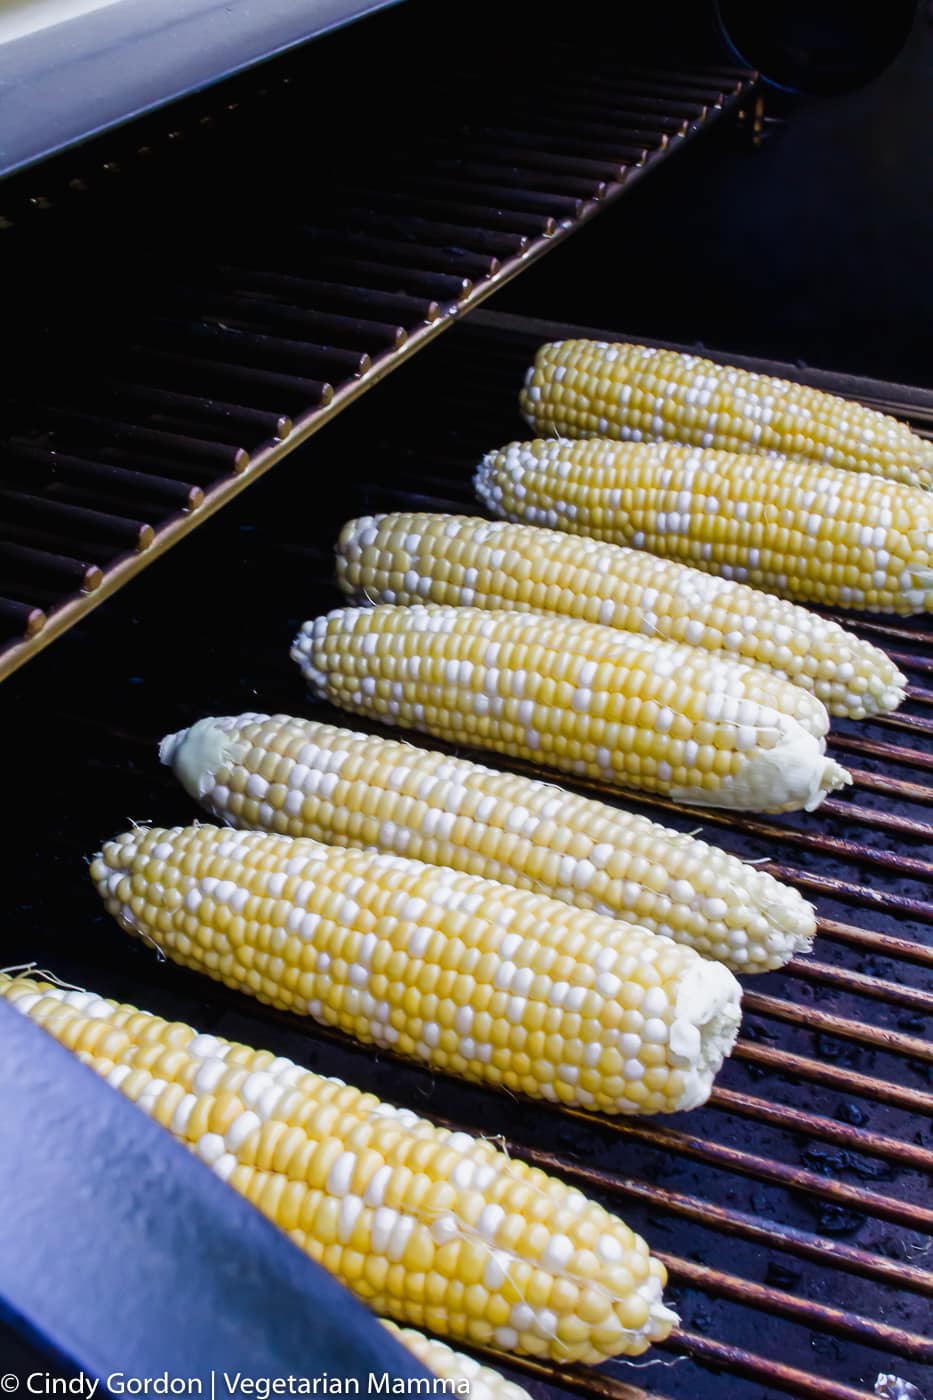 sweet corn on the grate of a smoker grill